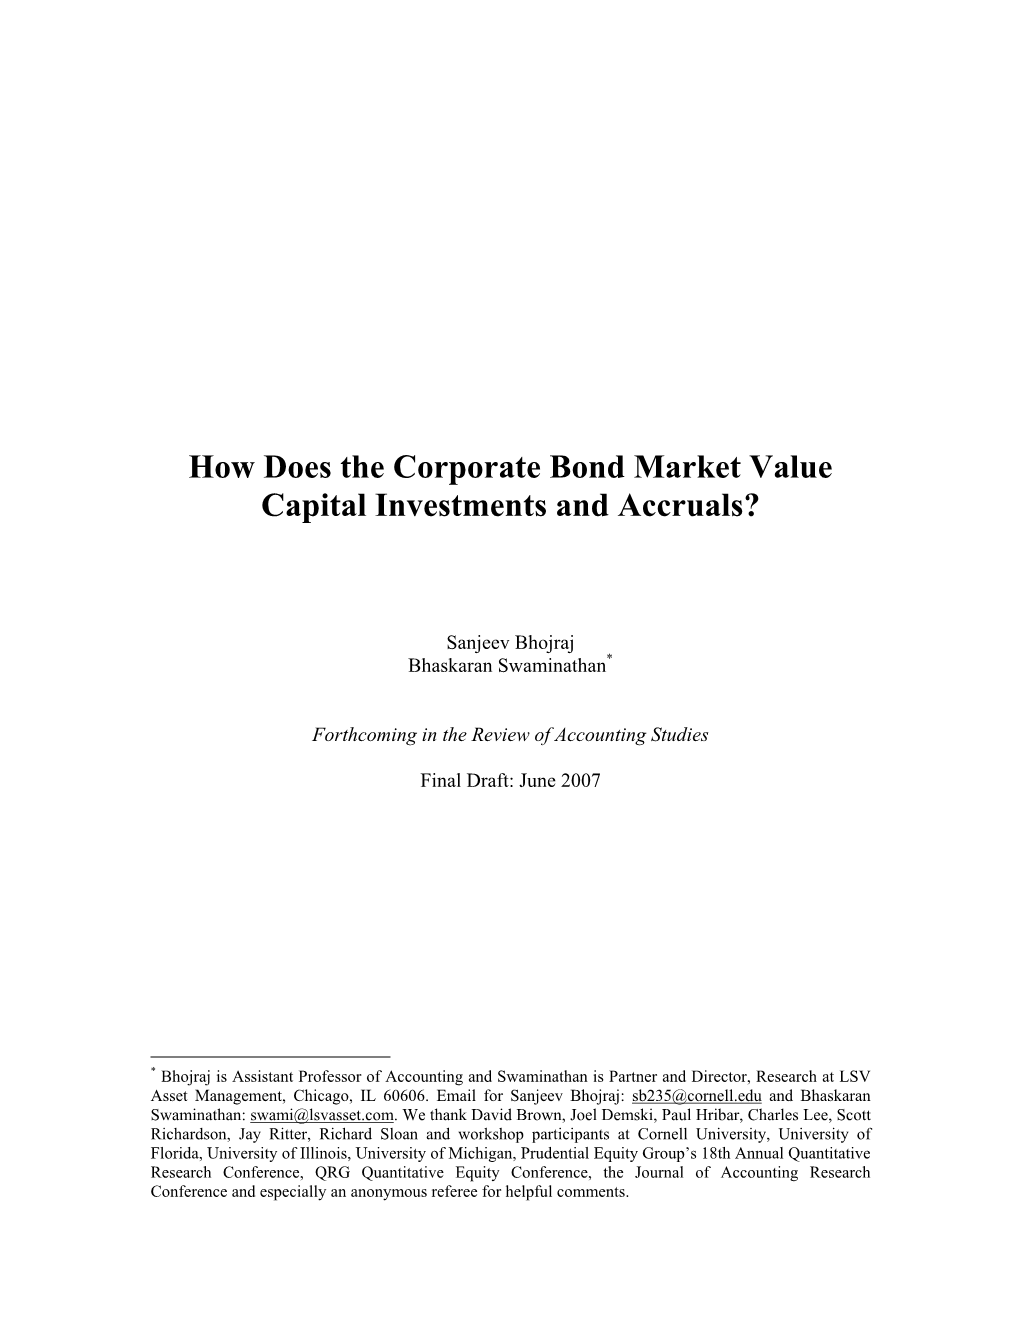 How Does the Corporate Bond Market Value Capital Investments and Accruals?